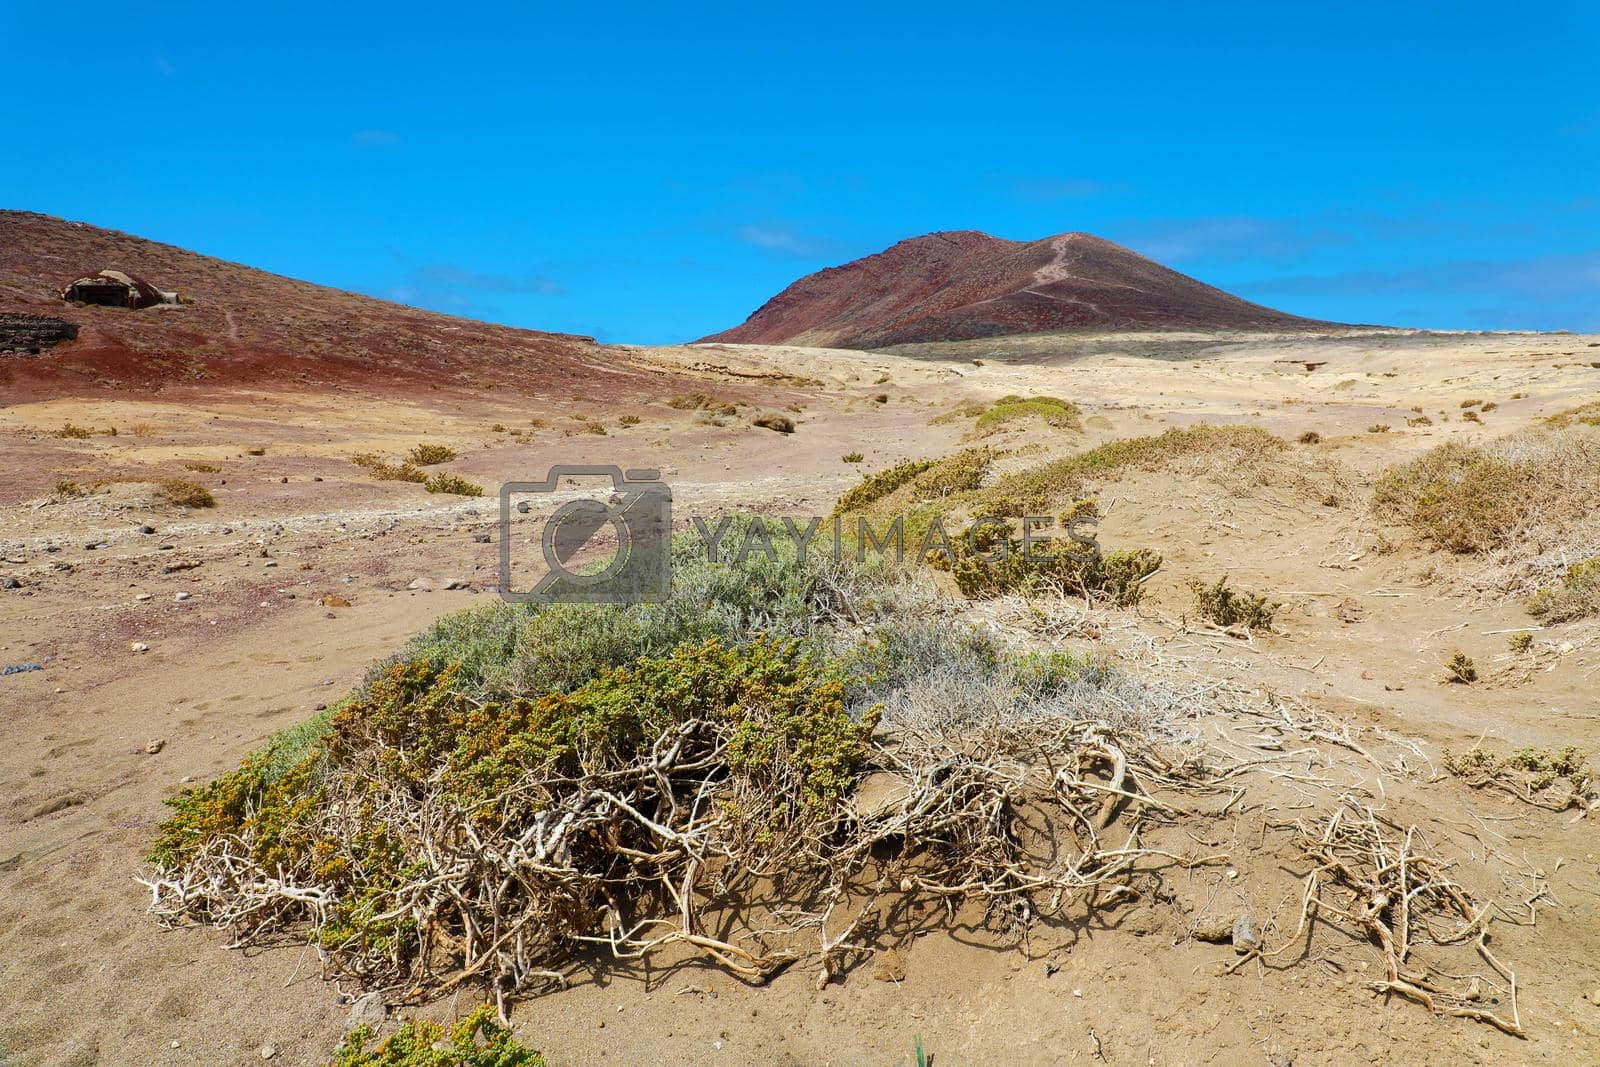 Royalty free image of A view of Montana Roja volcano with vegetation in sand desert of El Medano, Tenerife, Spain by sergio_monti